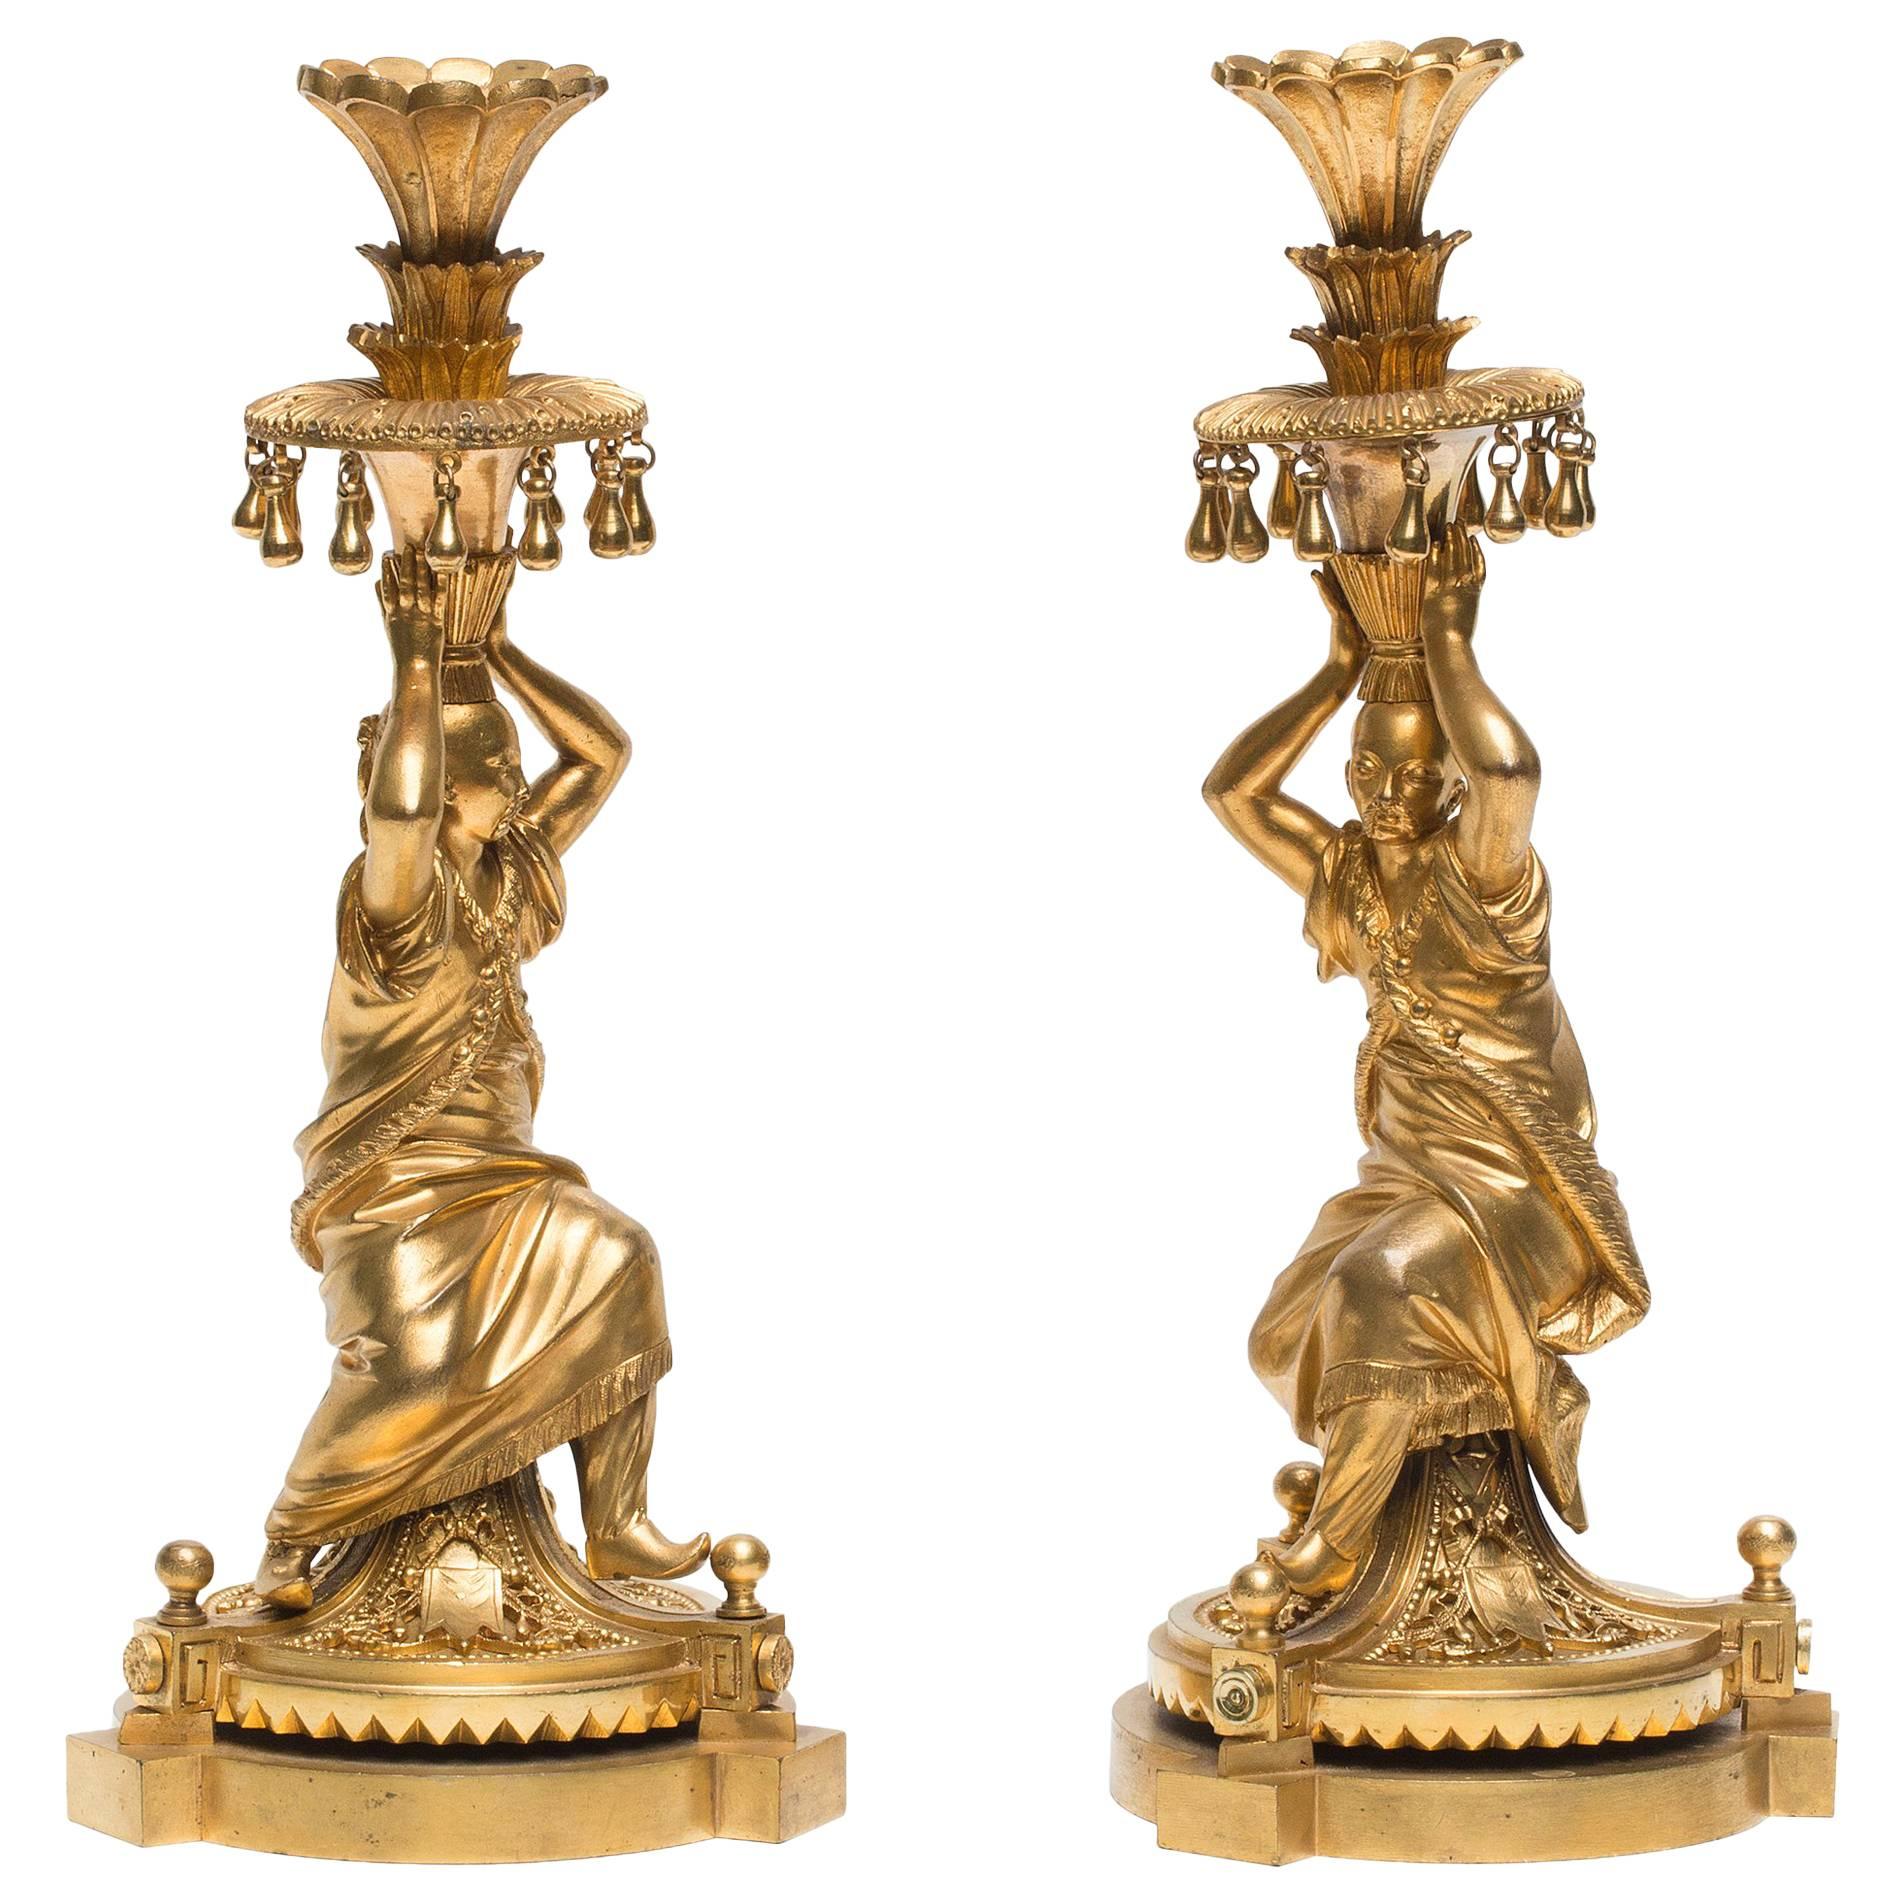 Rare Pair of Gilt-Bronze 'Chinese' Figural Candlesticks, circa 1790-1800 For Sale